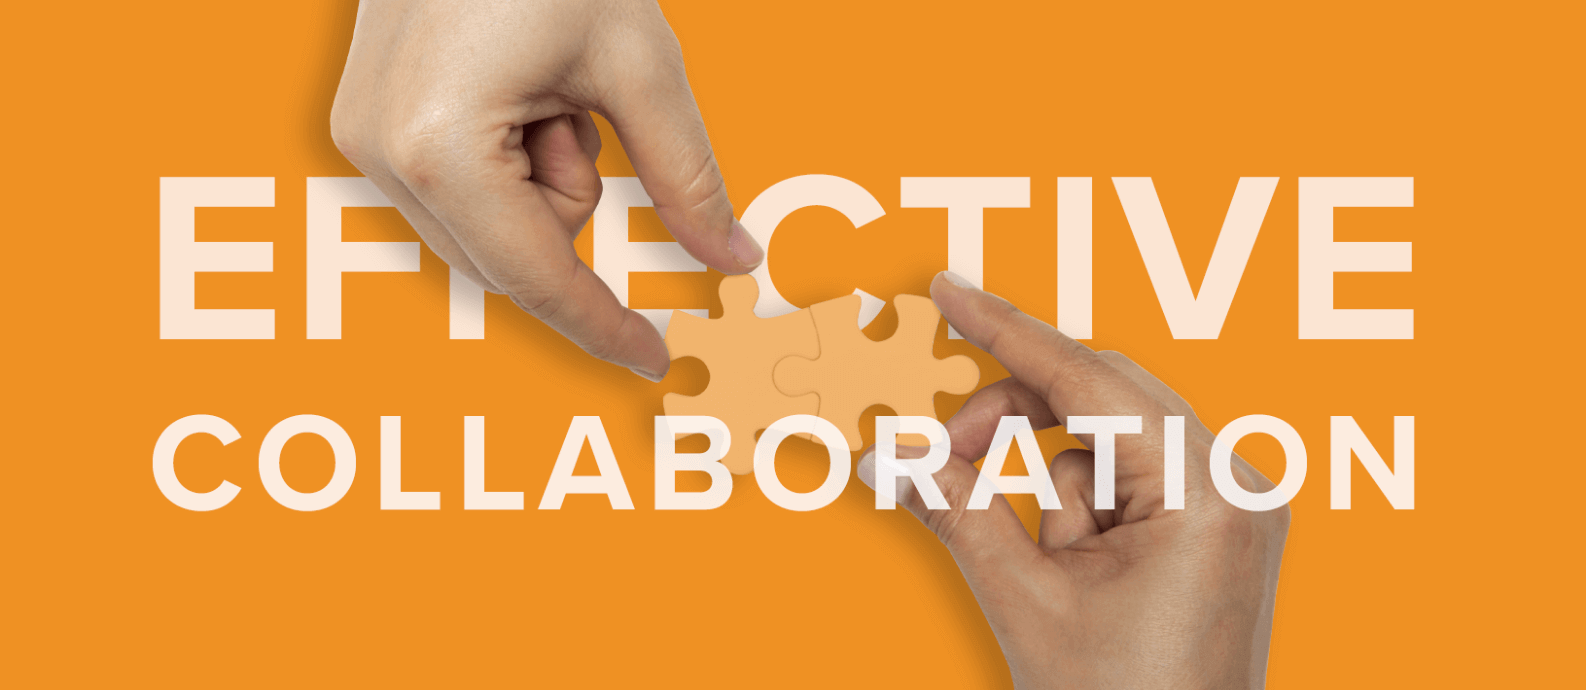 Effective collaboration with Your Web Design Agency